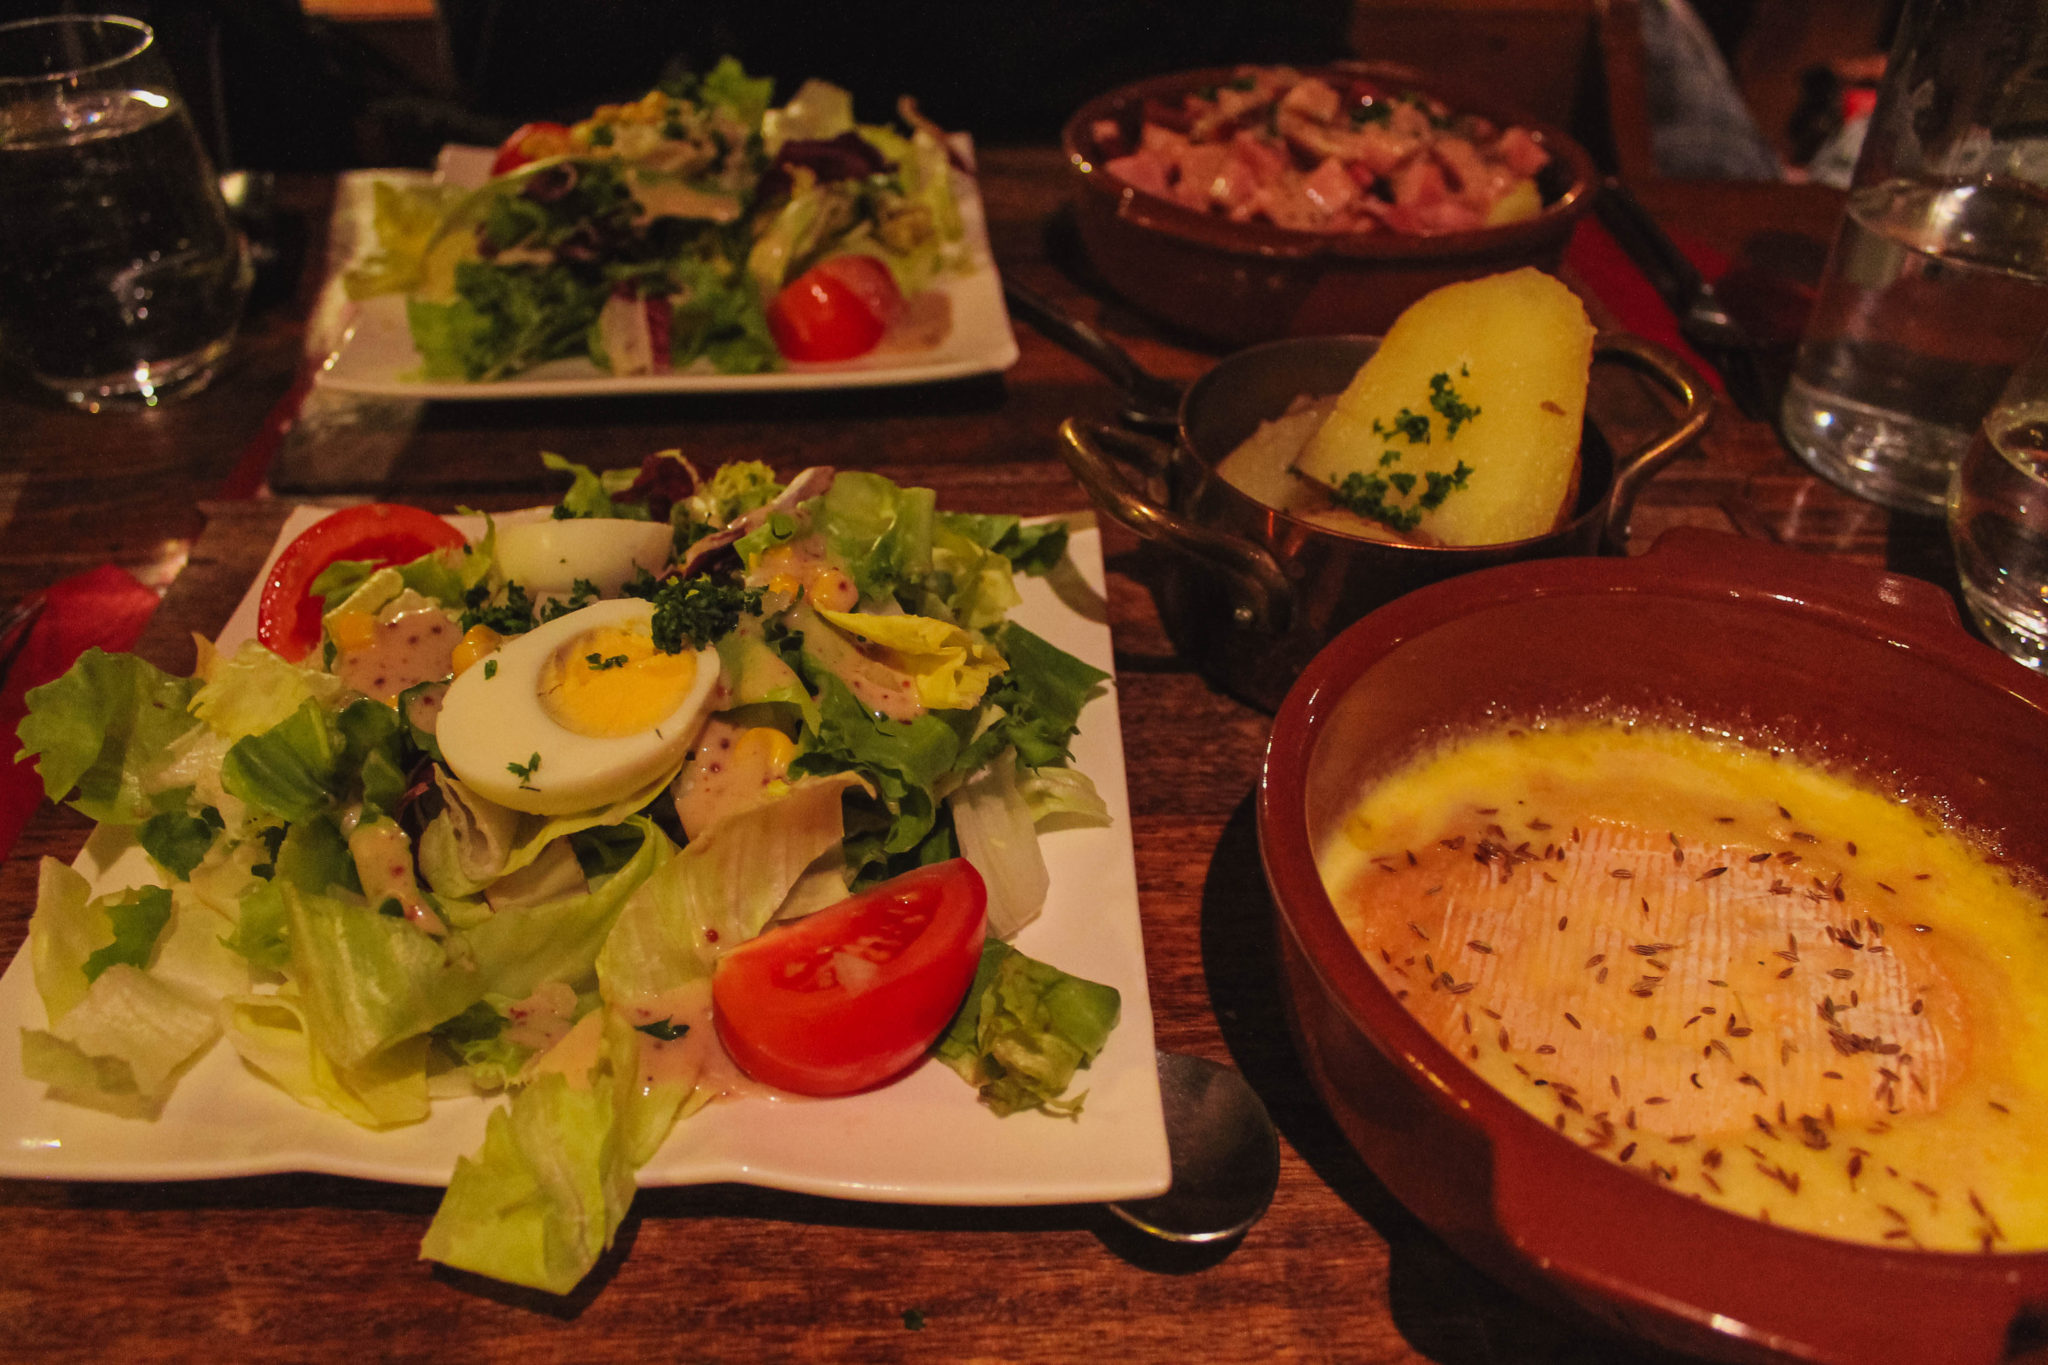 Traditional Alsatian food of a melted cheese and a salad in Colmar France